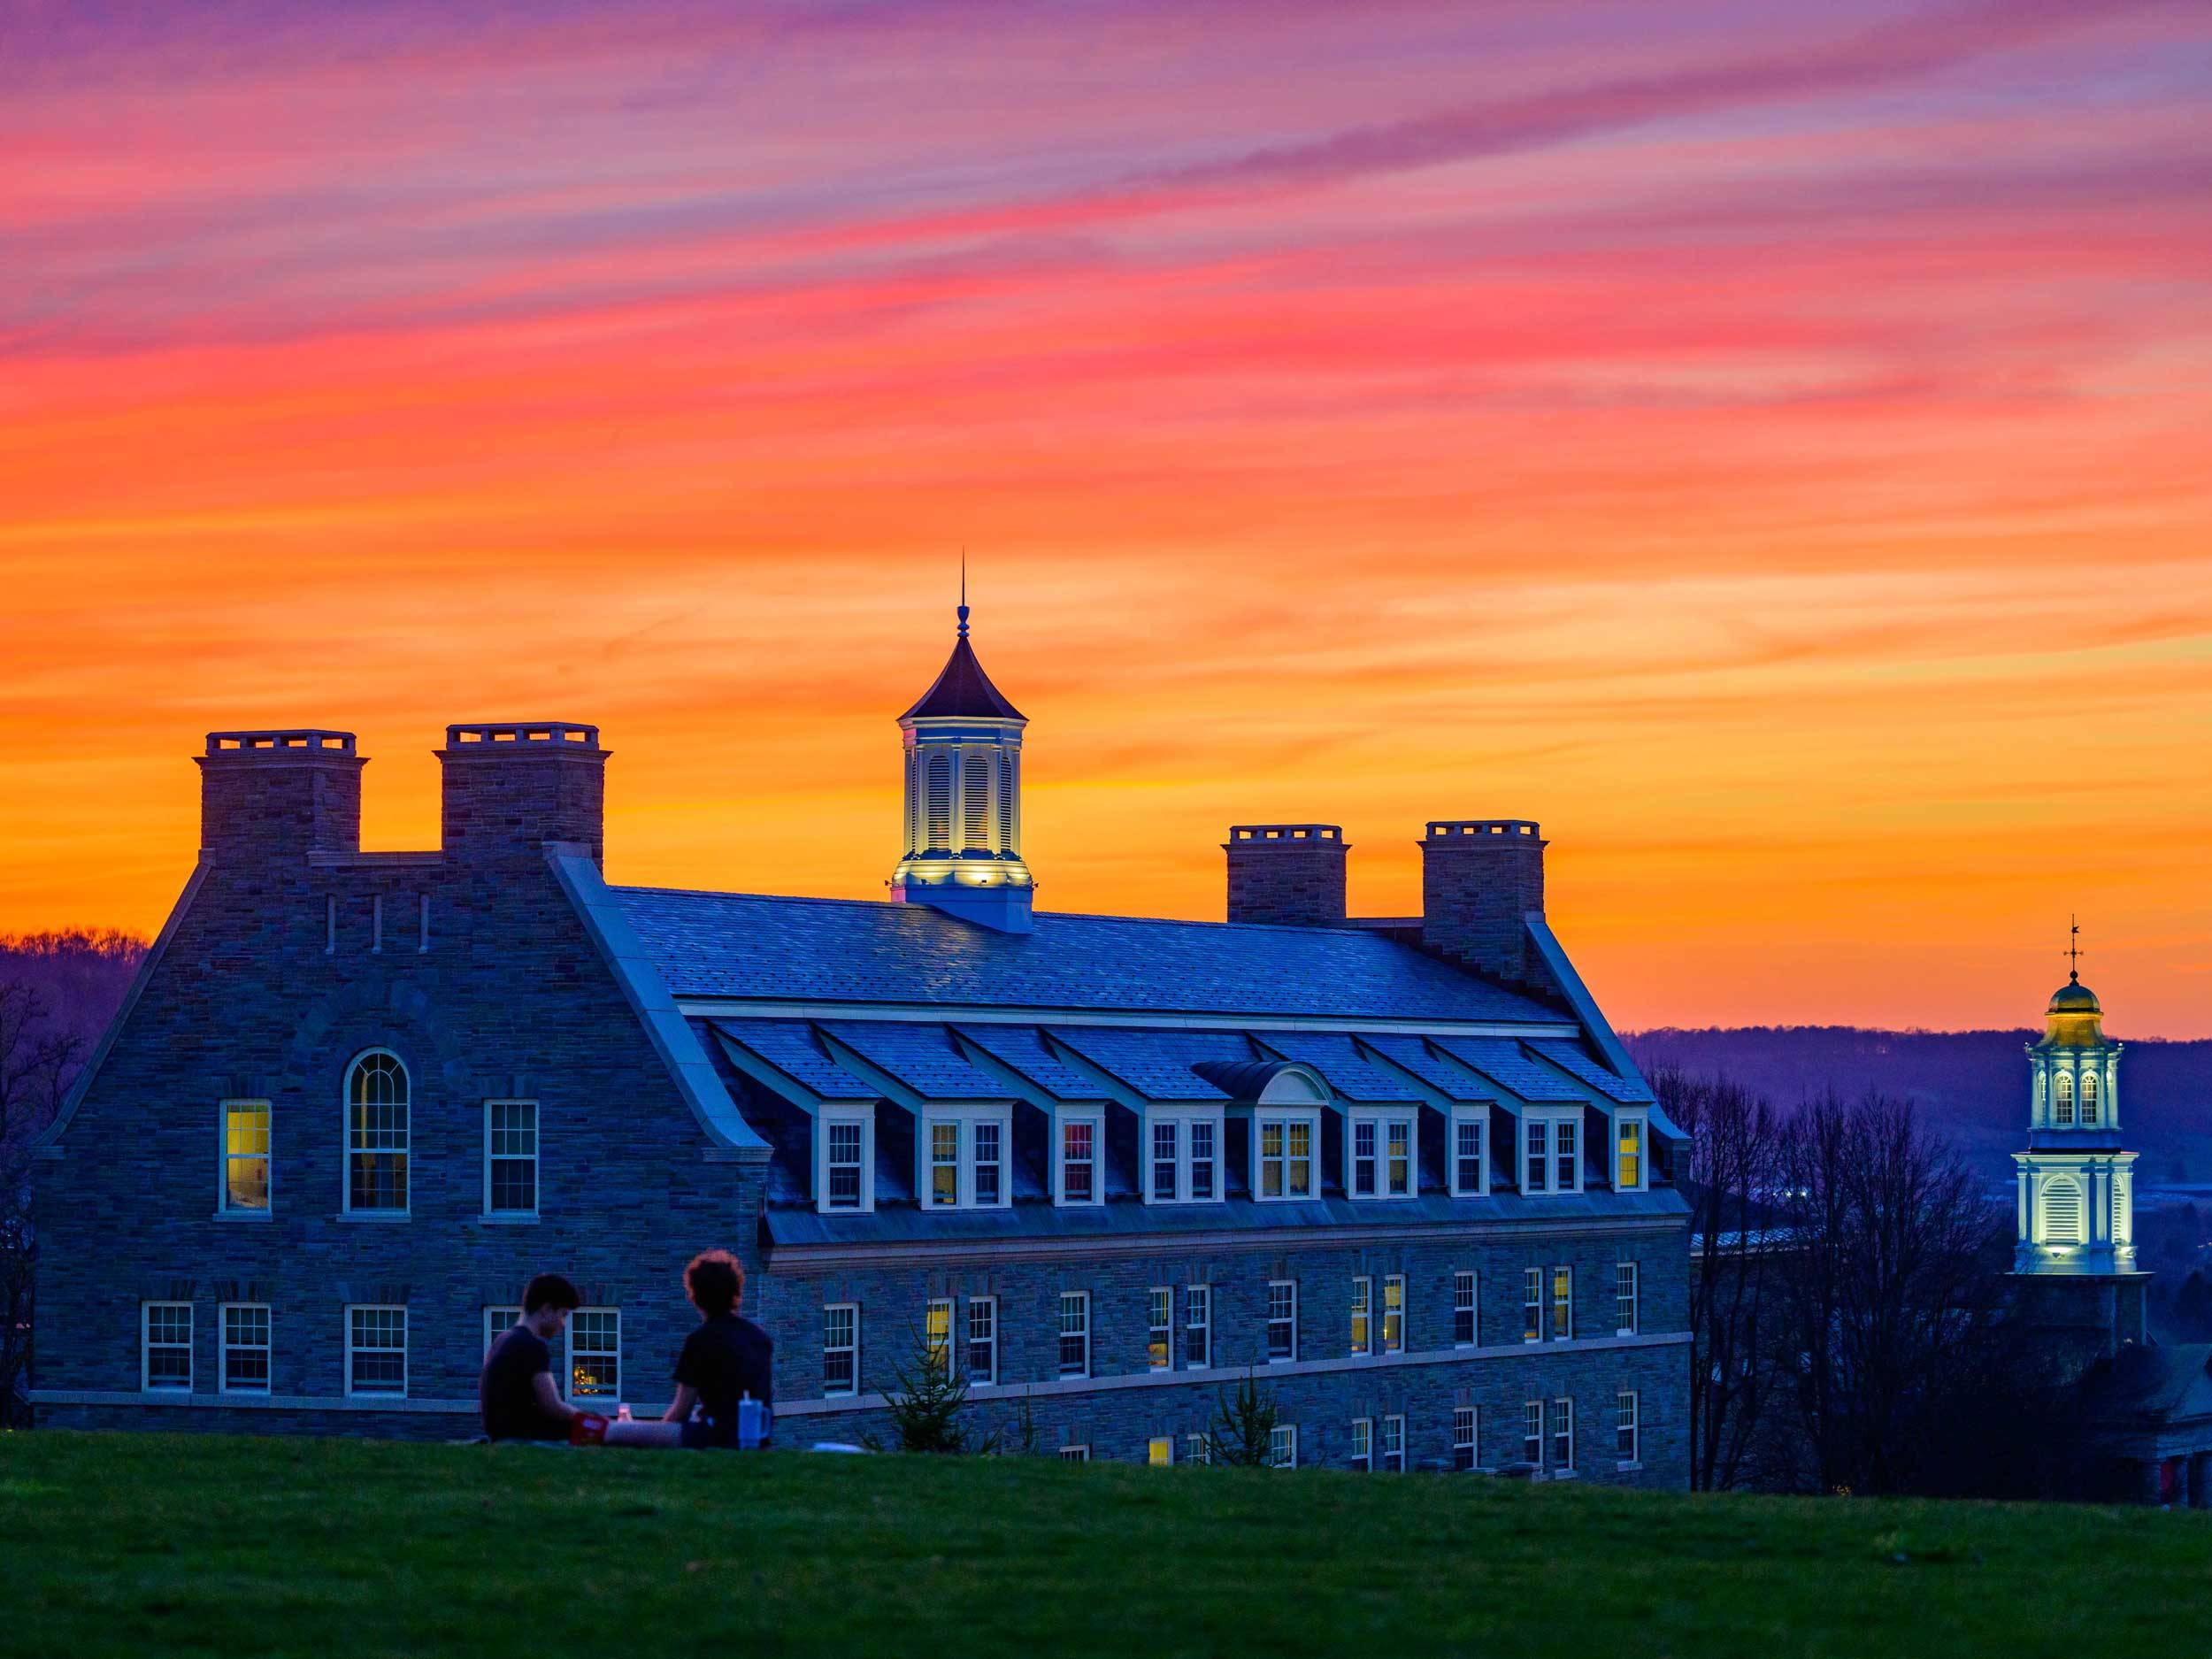 The sun sets over the Colgate campus with Jane Pinchin Hall and the Memorial Chapel in view